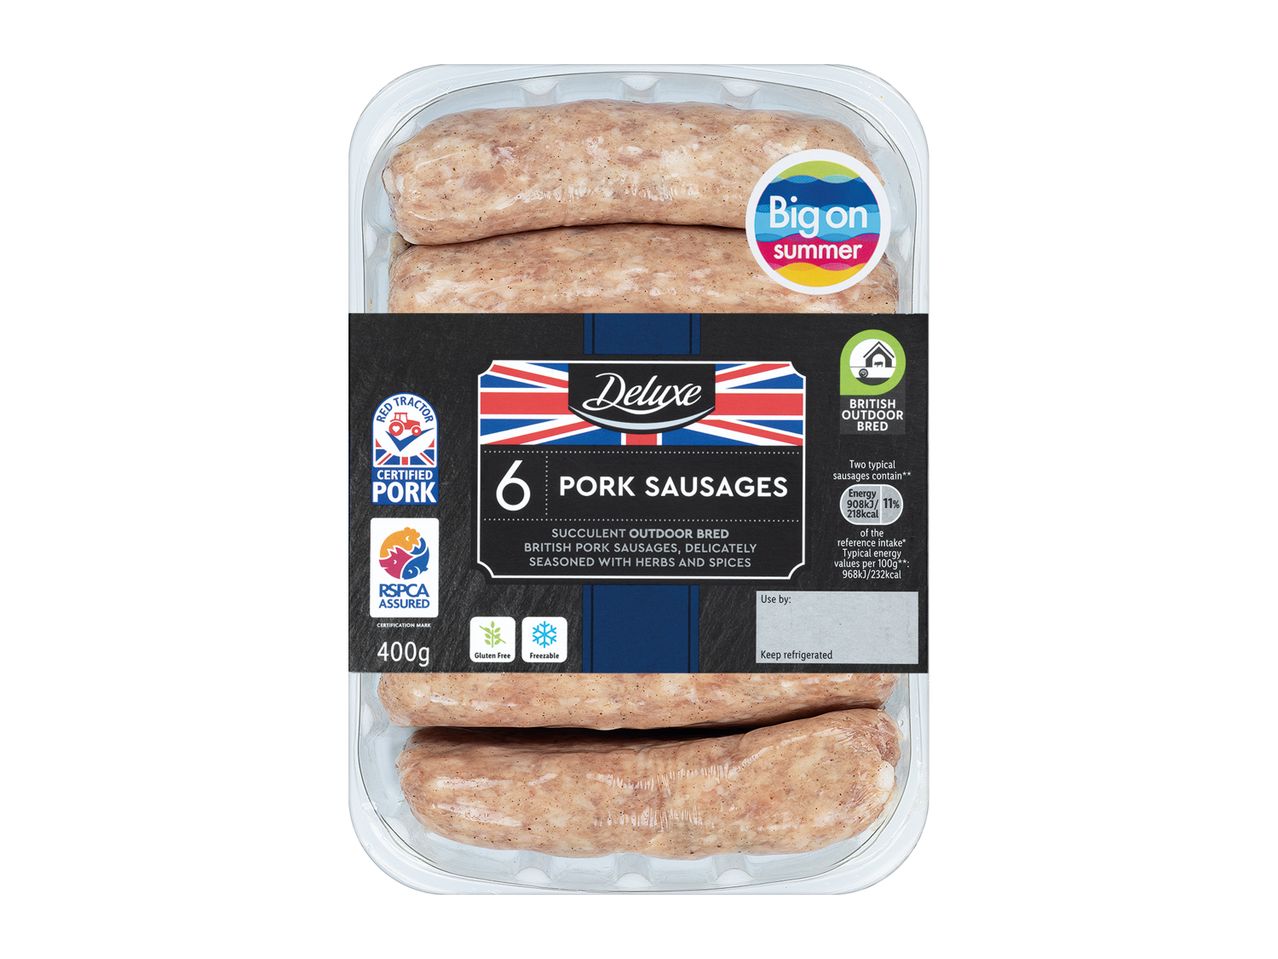 Go to full screen view: Deluxe RSPCA Cumberland Sausage - Image 1